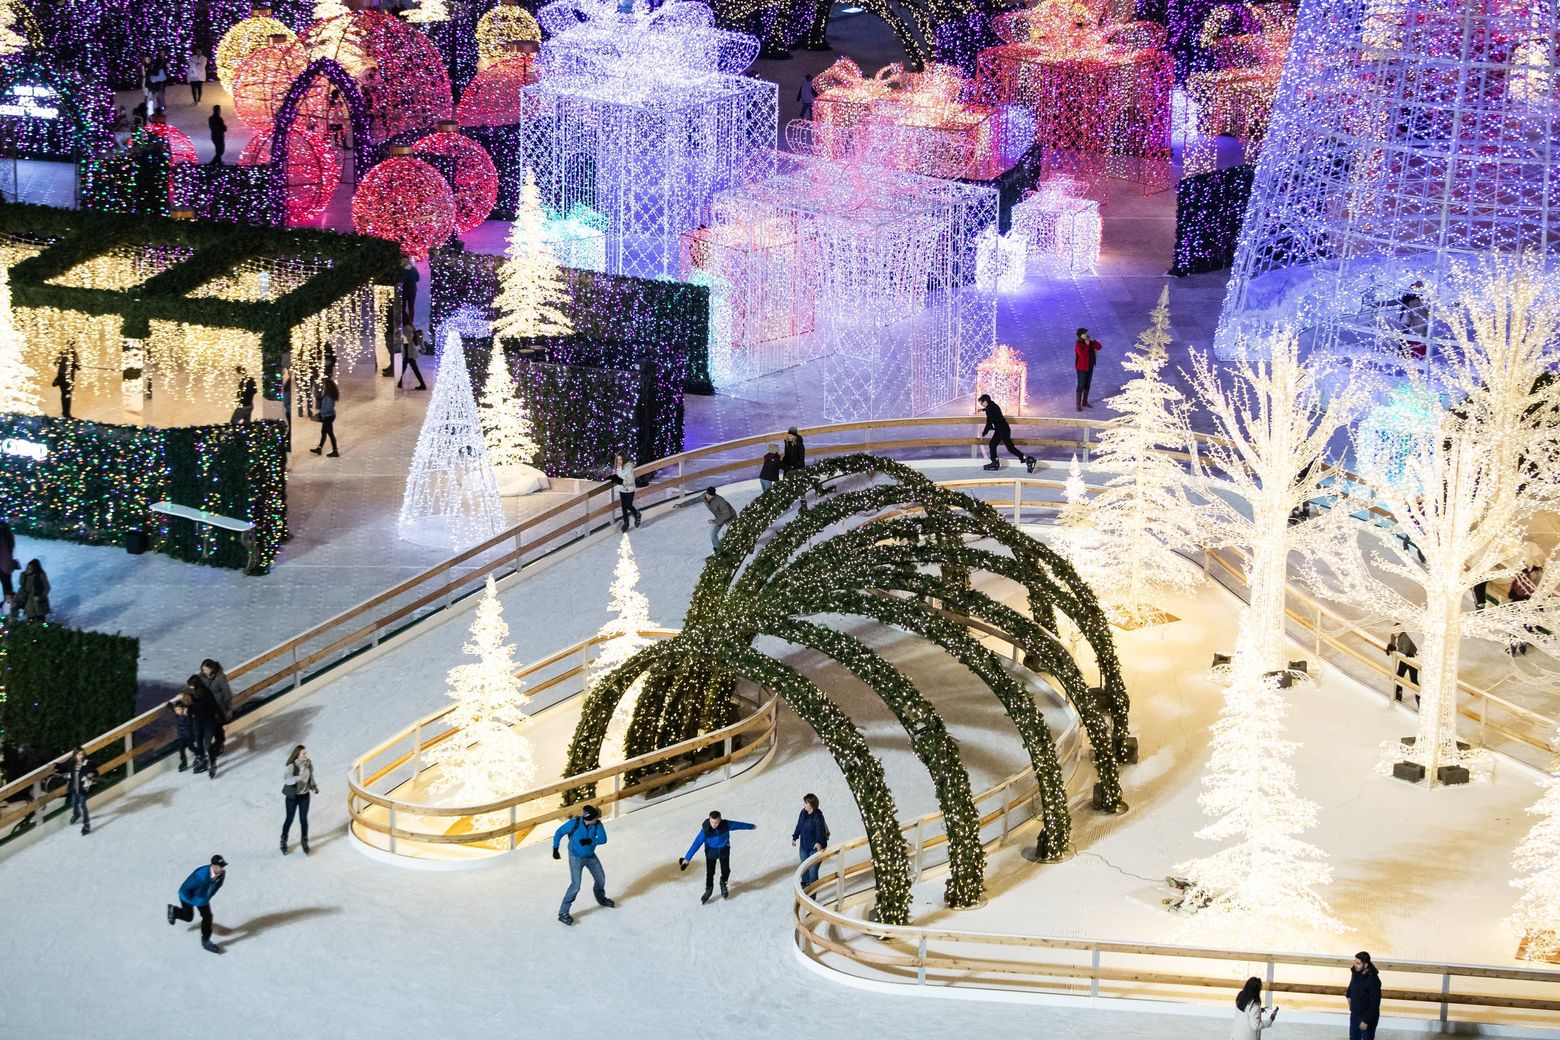 Enchant Christmas, with its light maze and skating trail